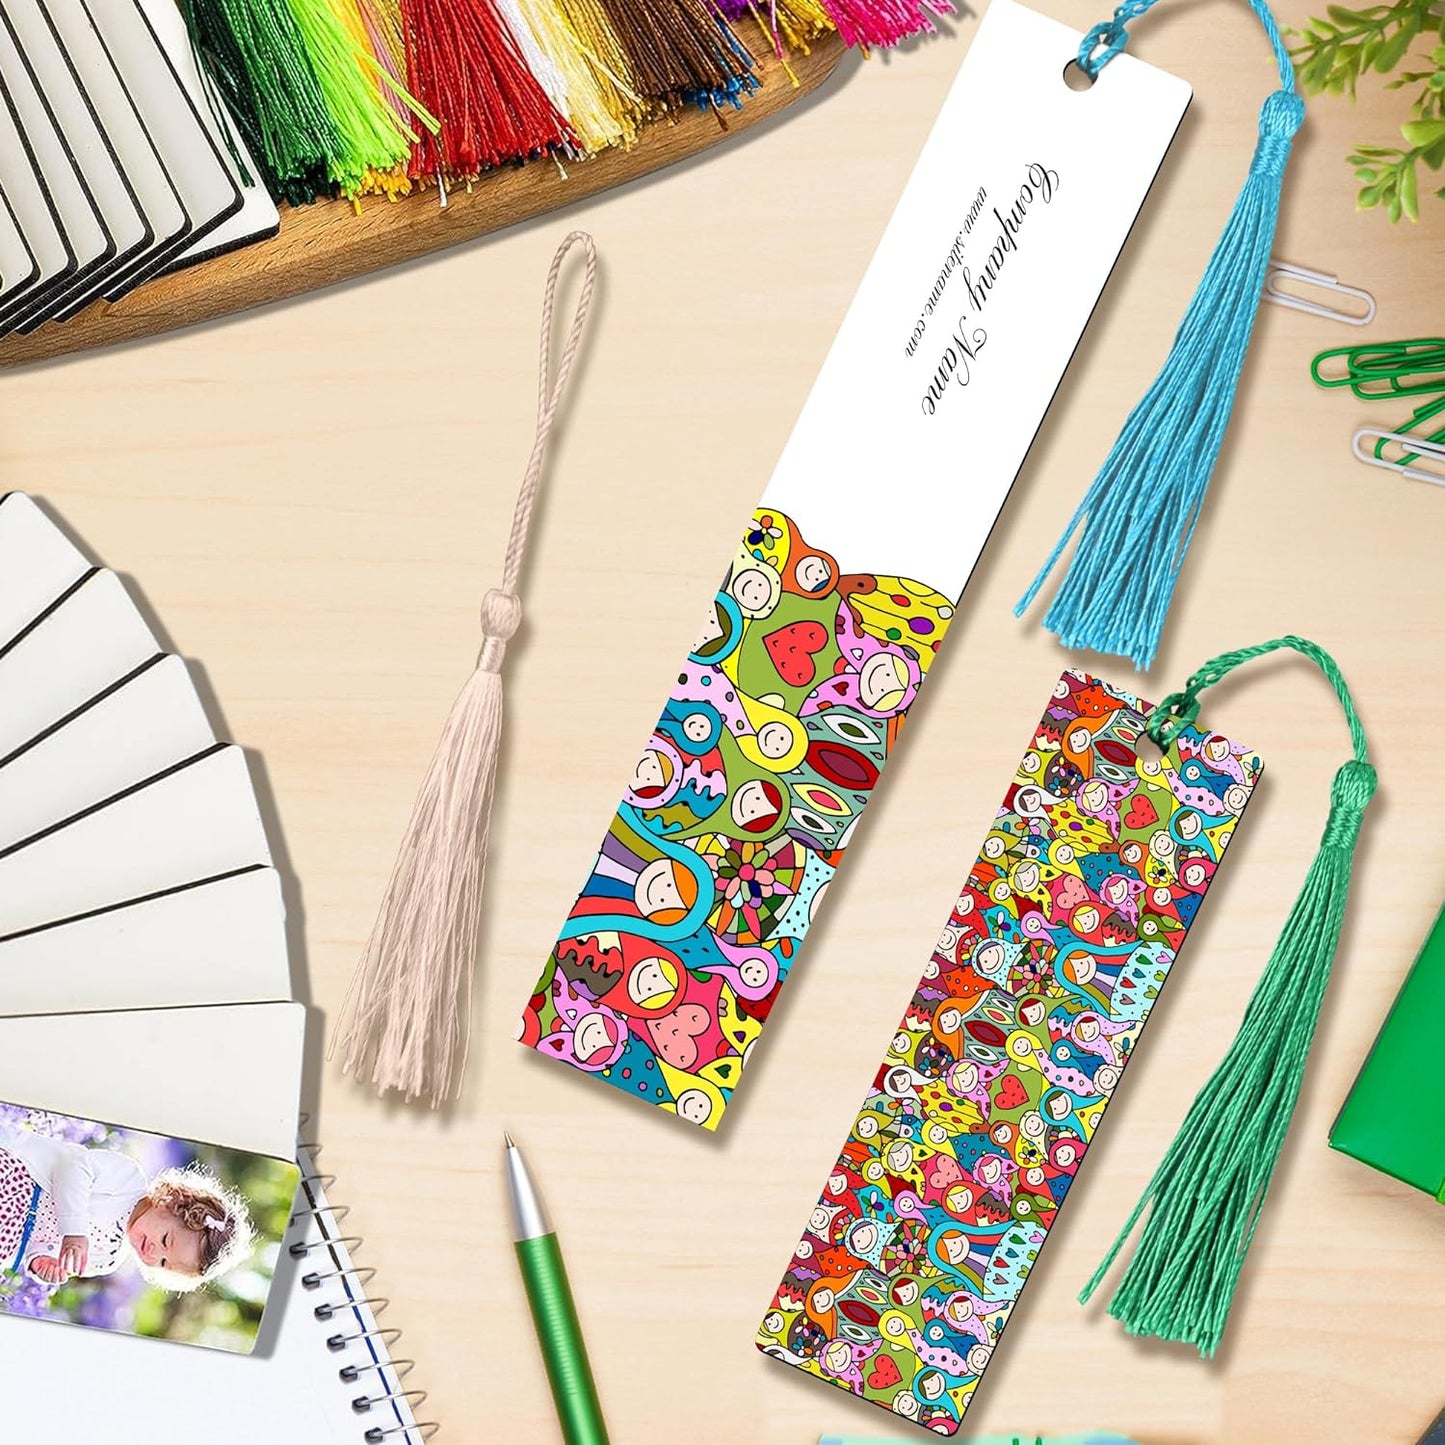 Wholesale Sublimation Blank Metal Printable Bookmarks To Color With Hole  And Tassels For DIY Decoration Cra 230627 From Kai10, $16.89